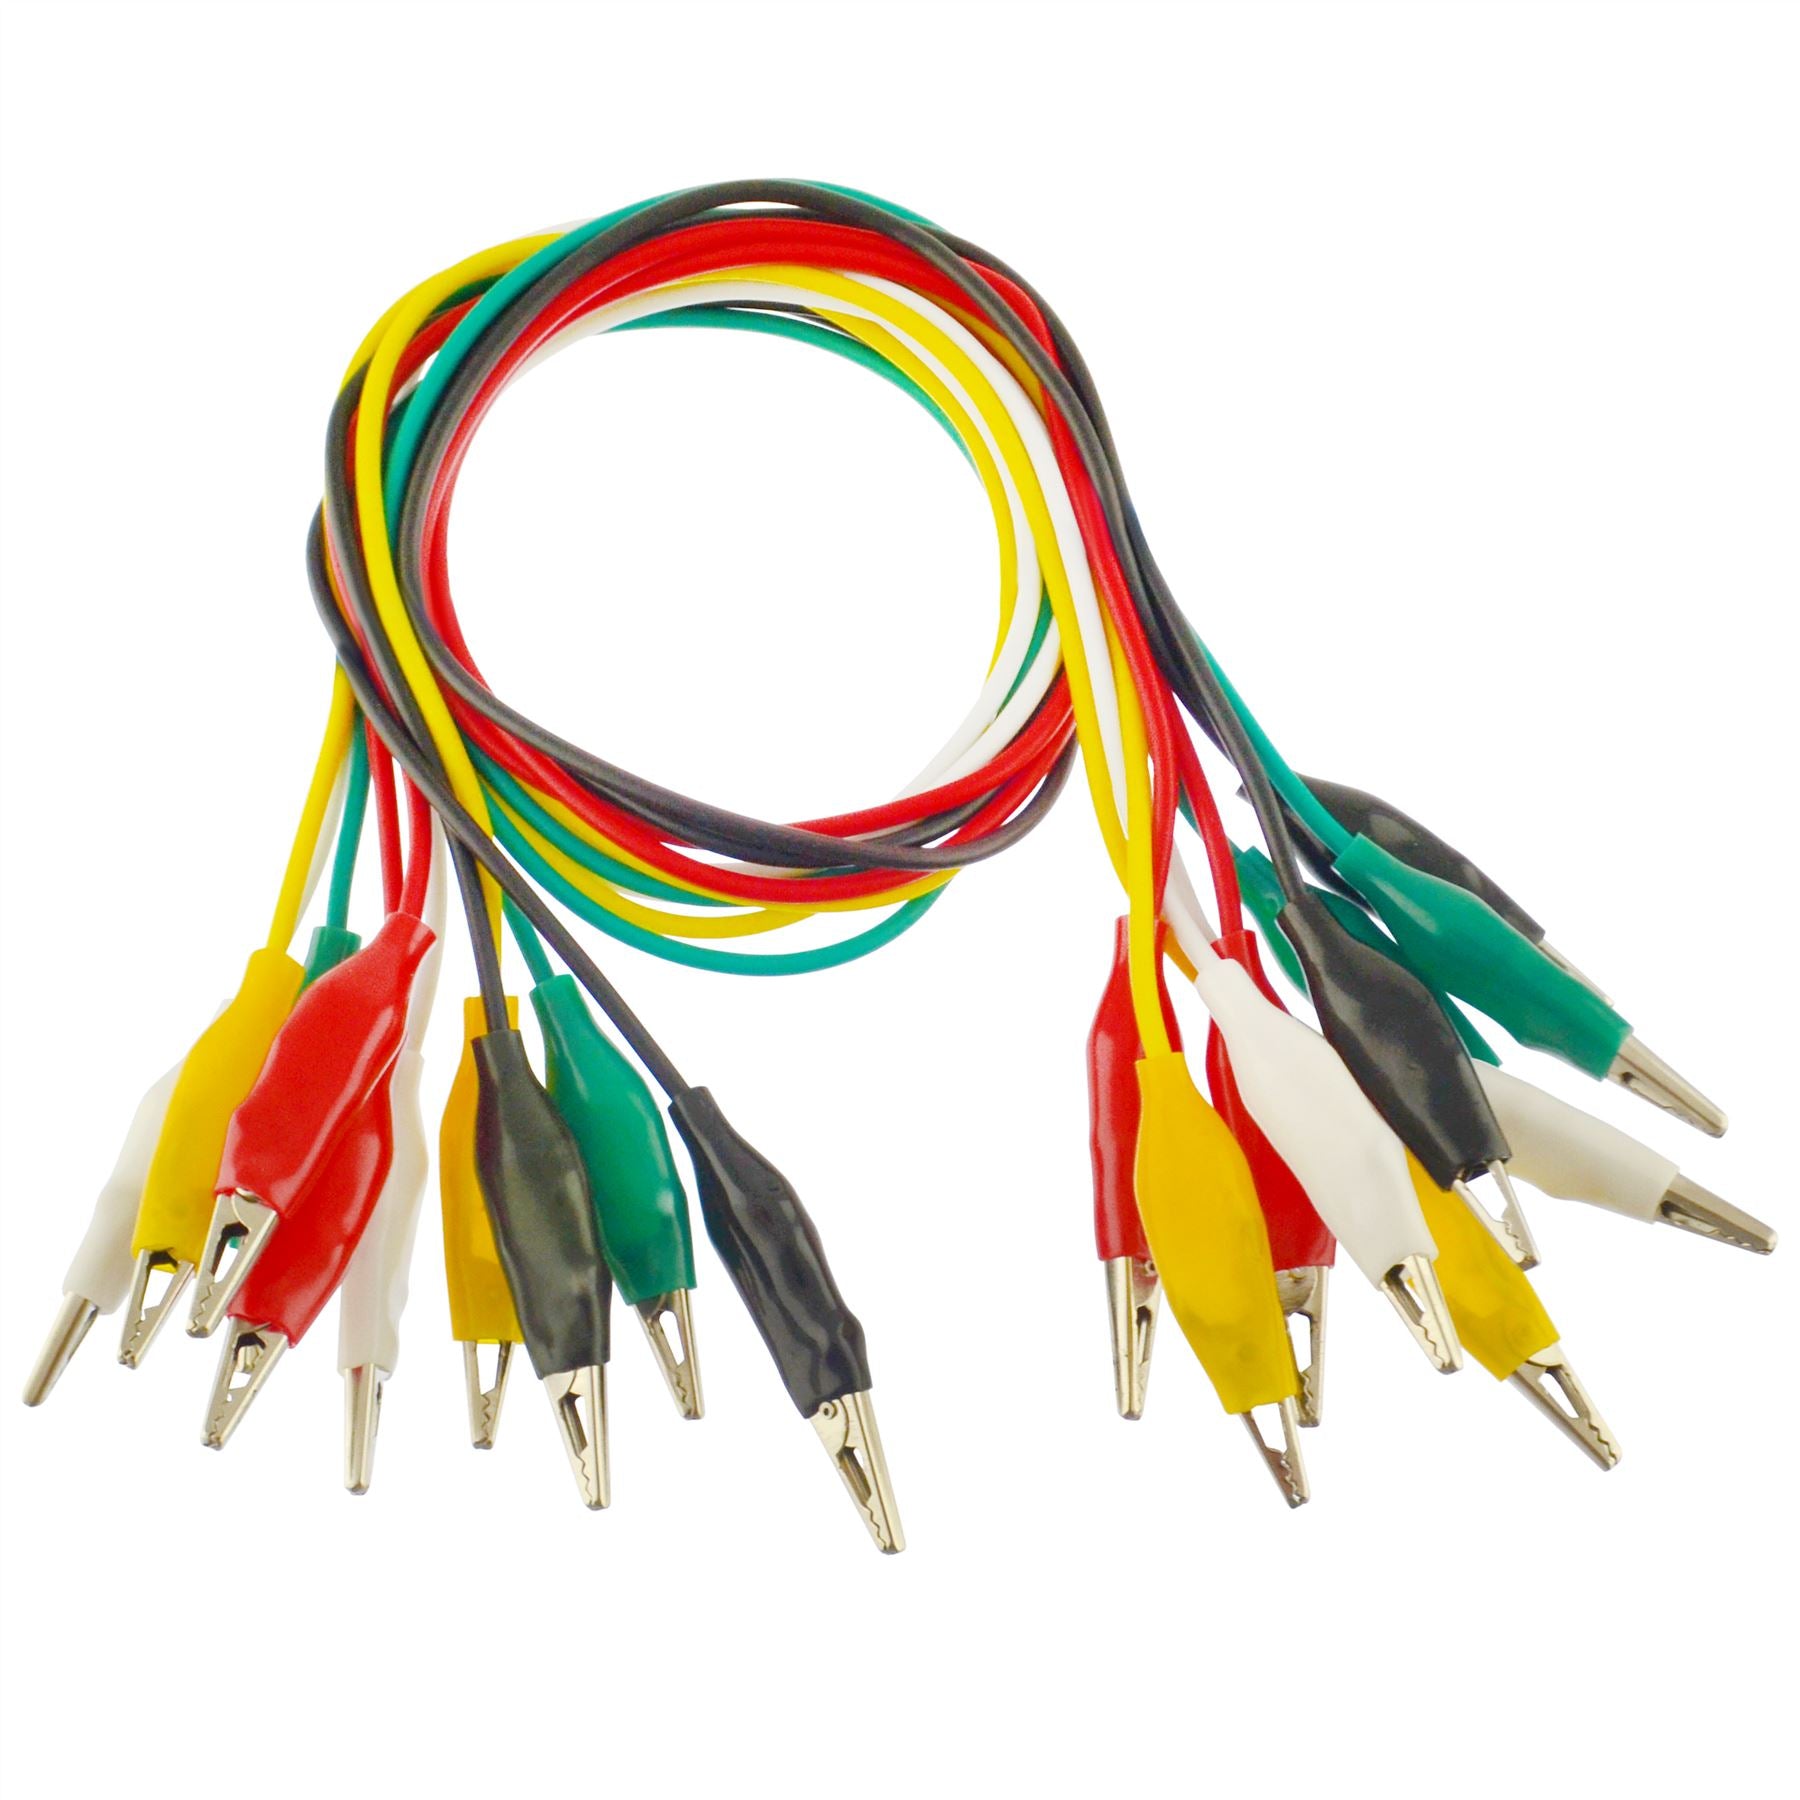 50cm Coloured Test Leads With 25mm Crocodile Alligator Clips 10 leads 5 colours